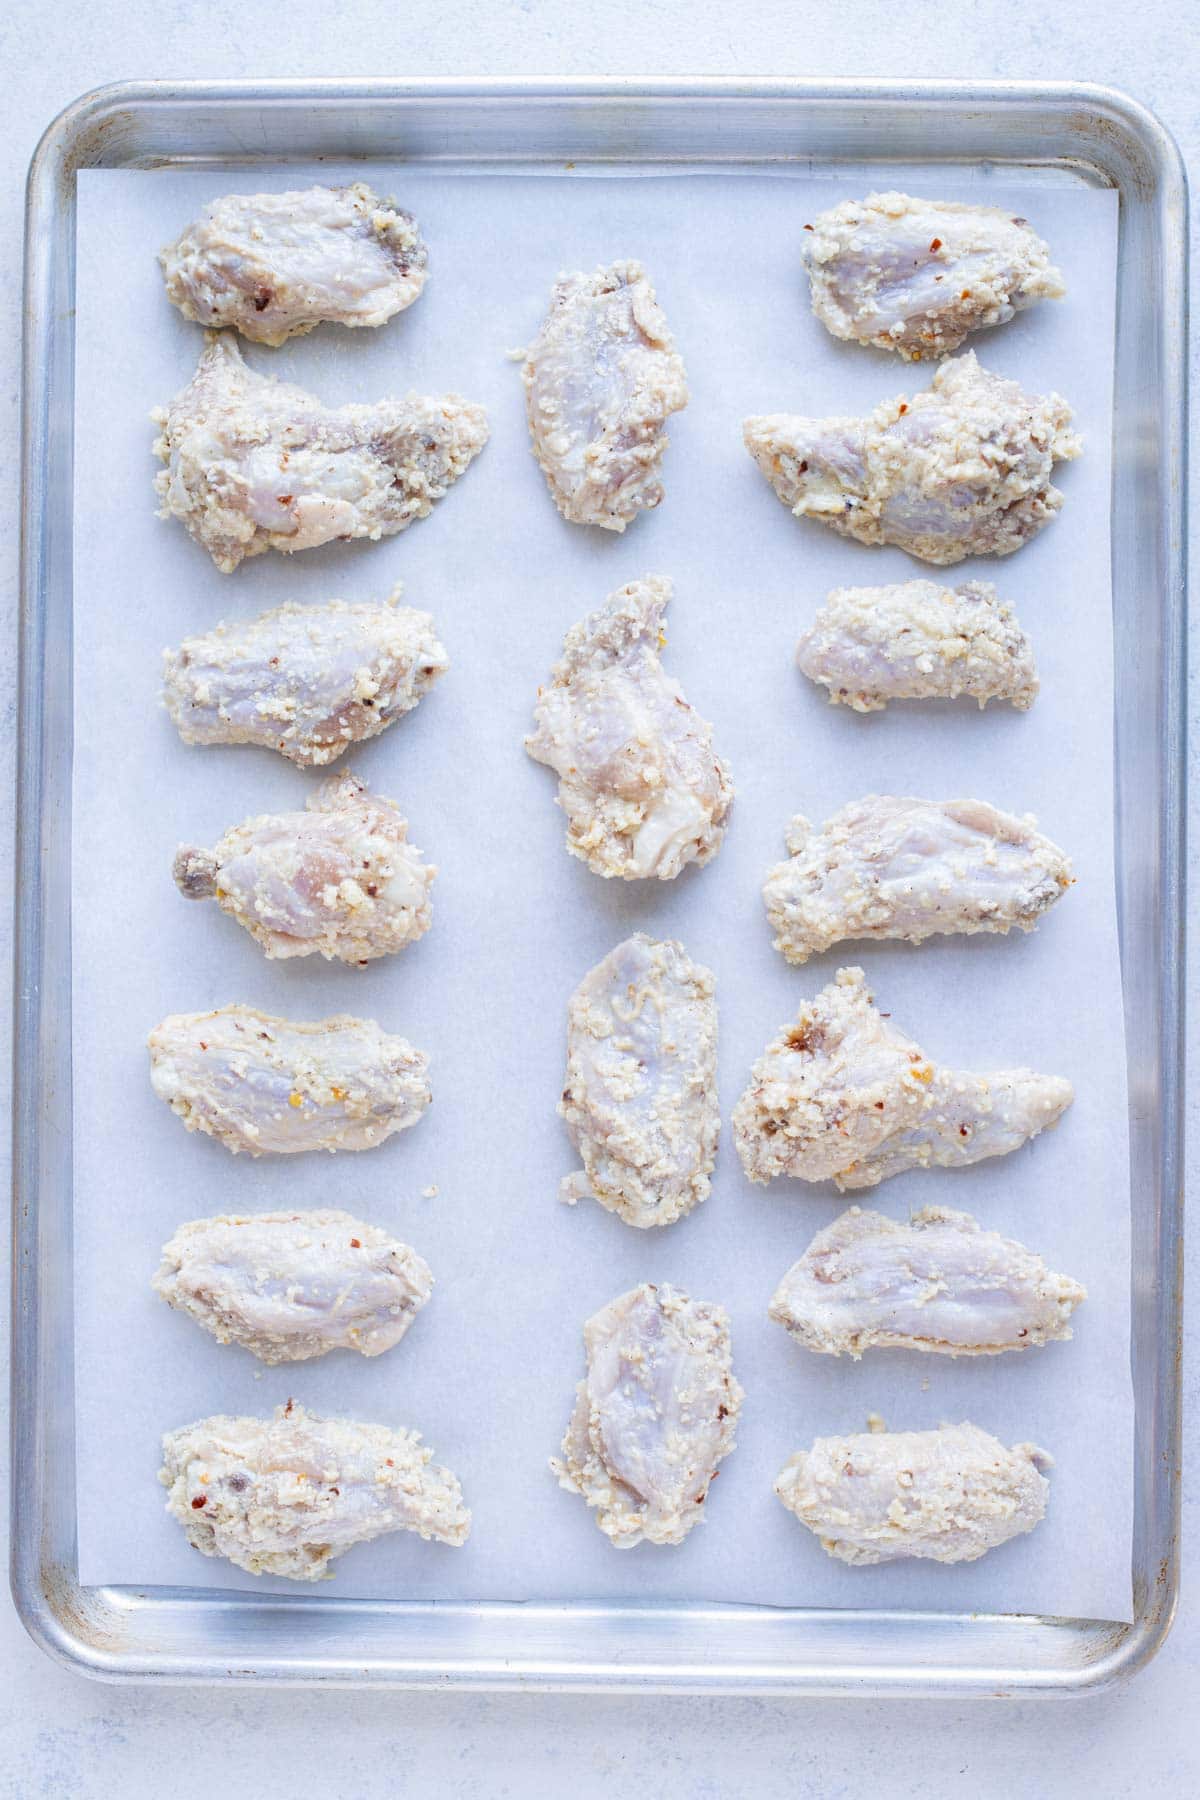 Wings are laid flat on a baking sheet on parchment paper.